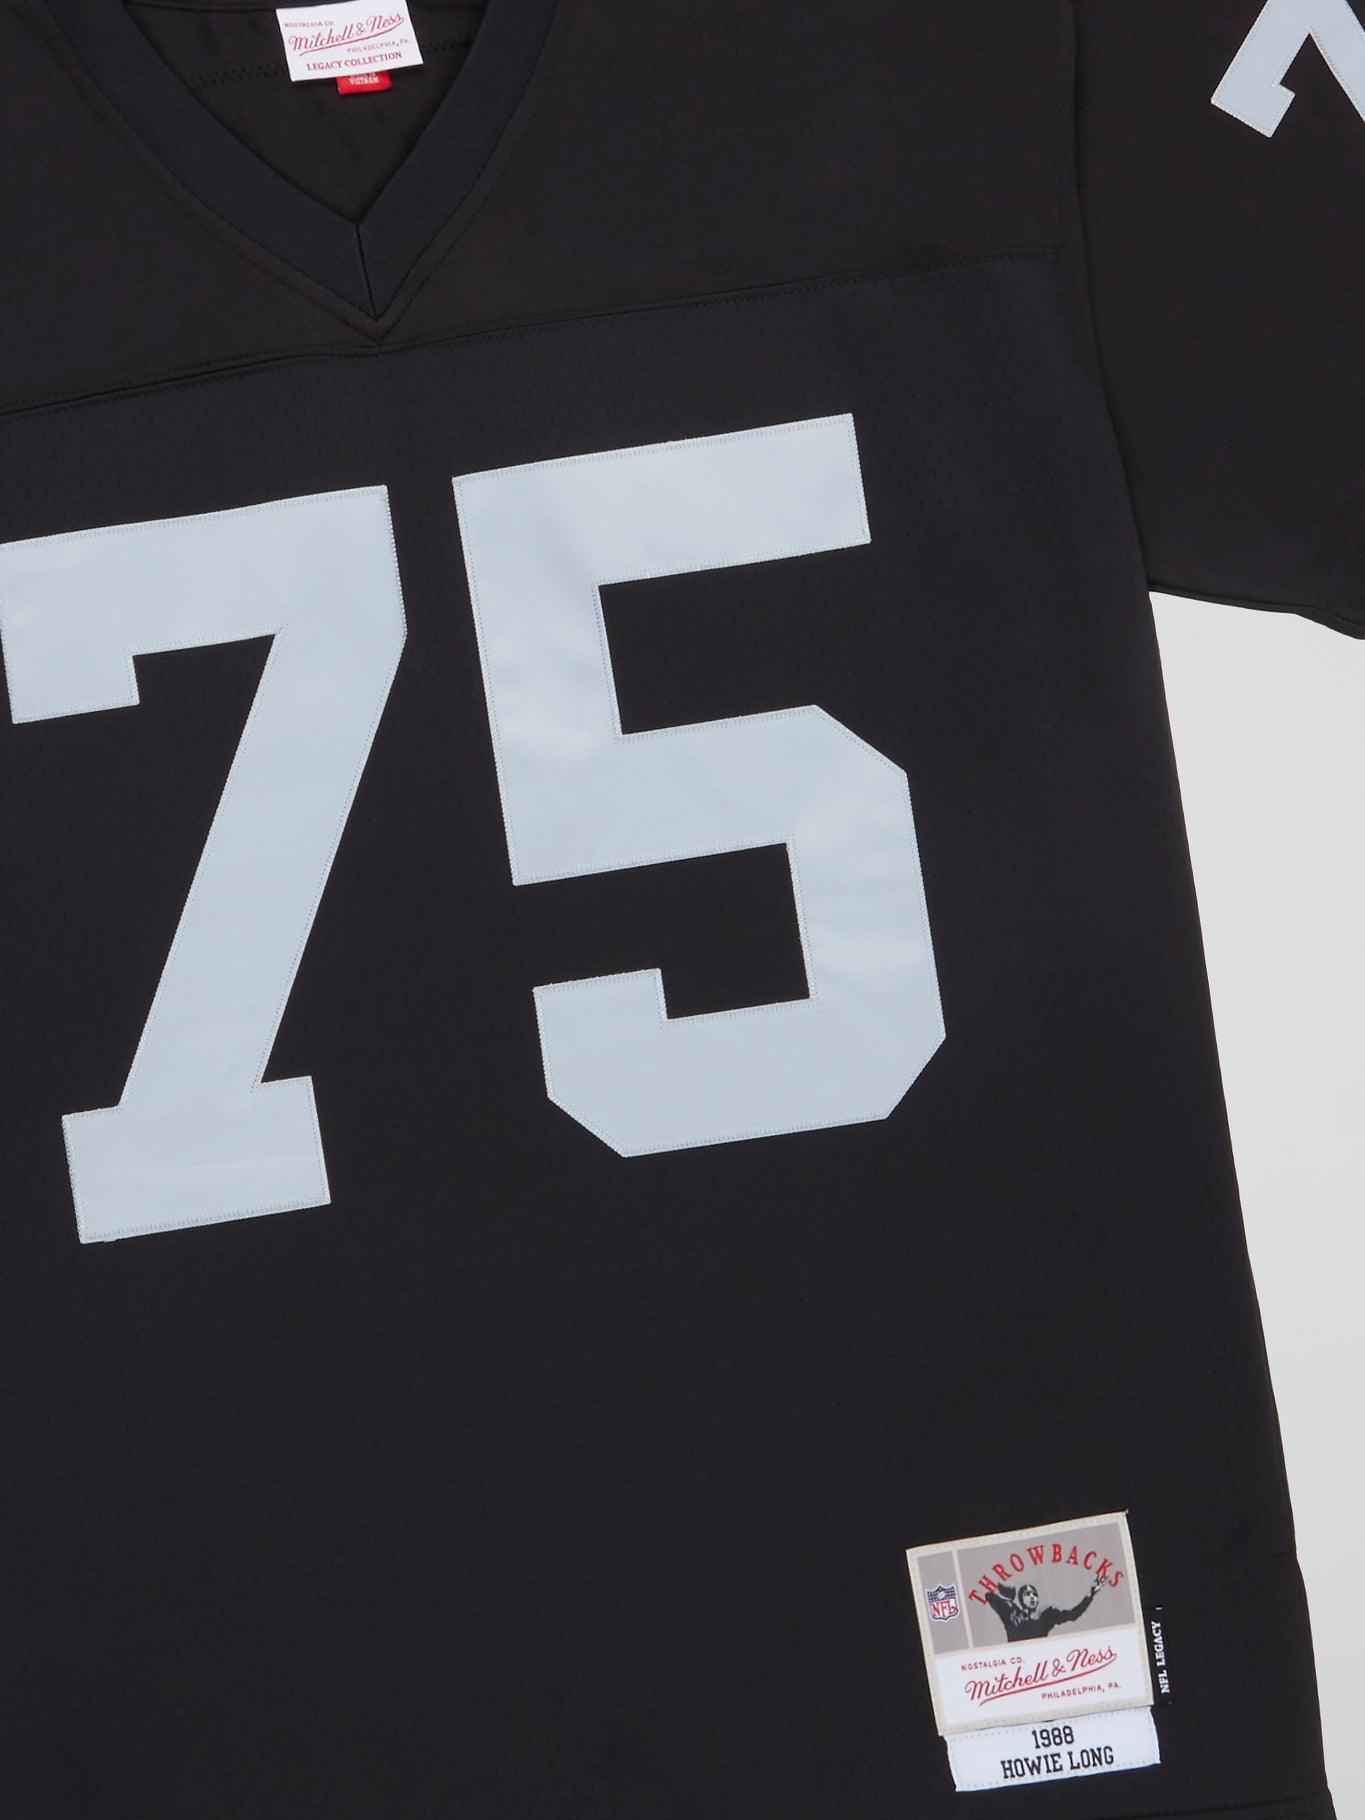 Raiders NFL jersey collection